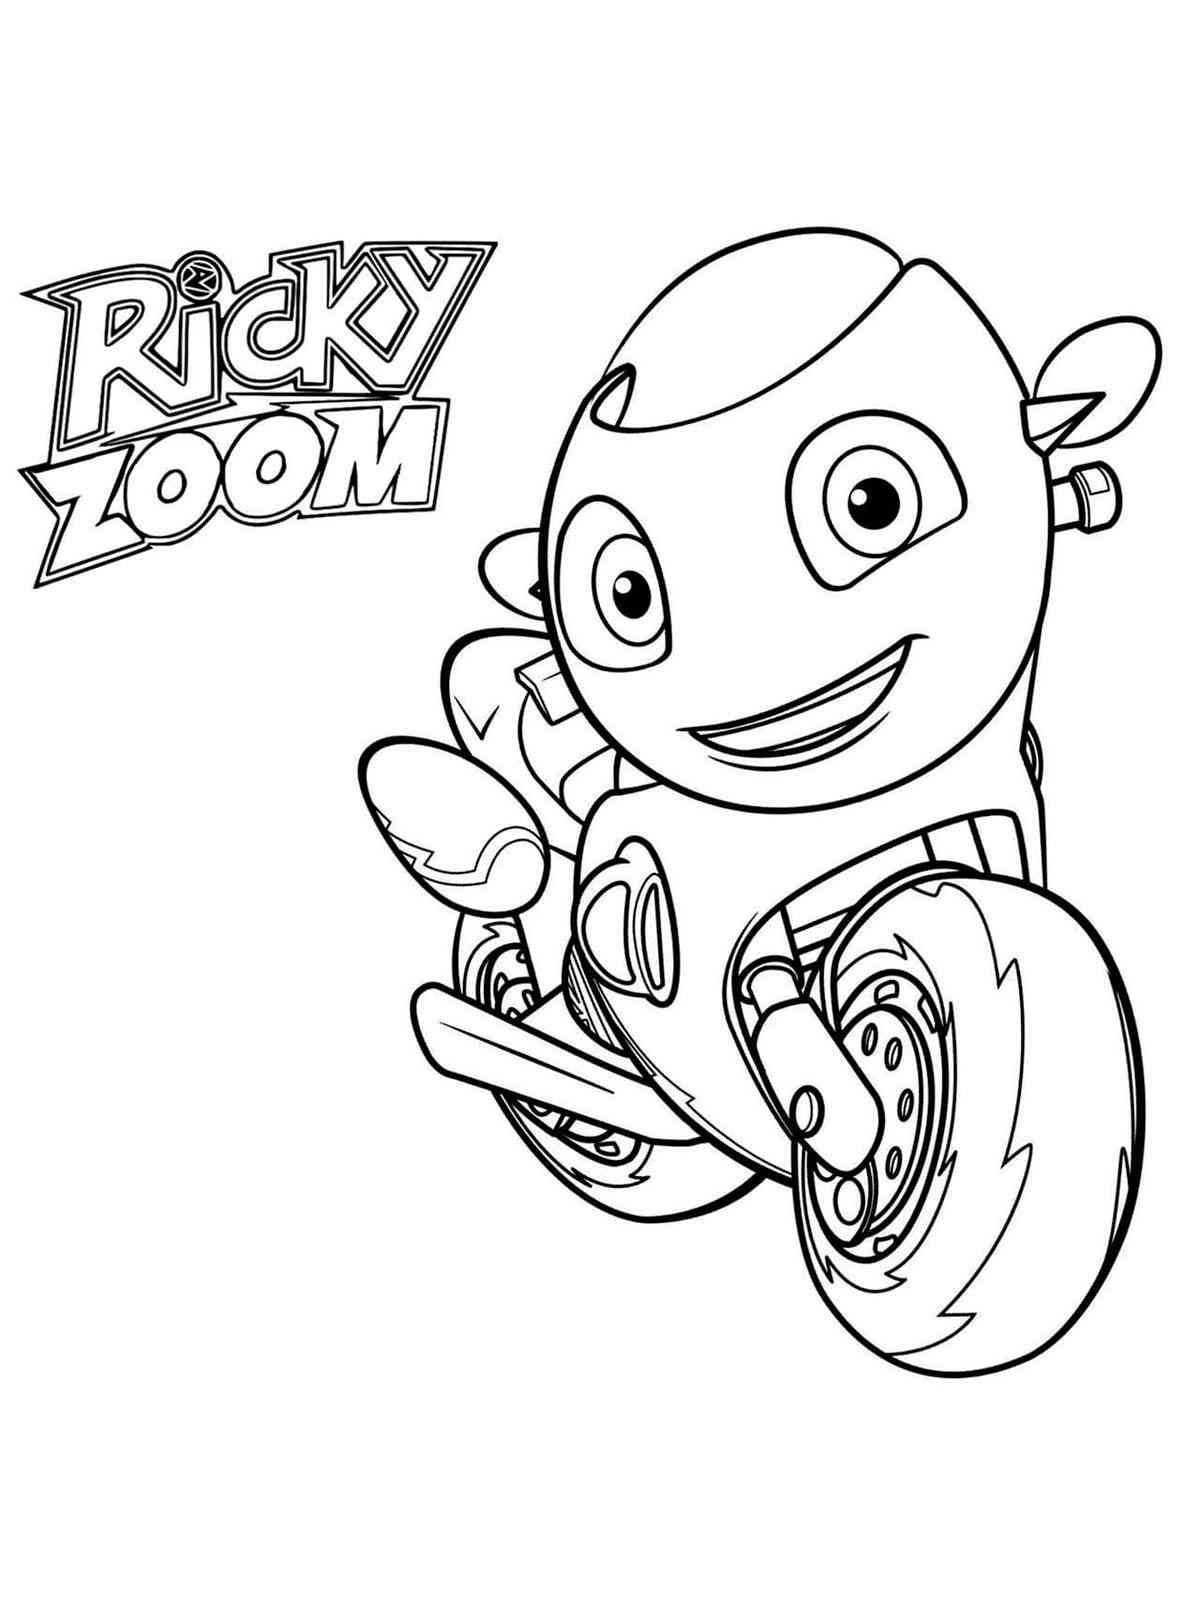 Ricky Zoom coloring pages